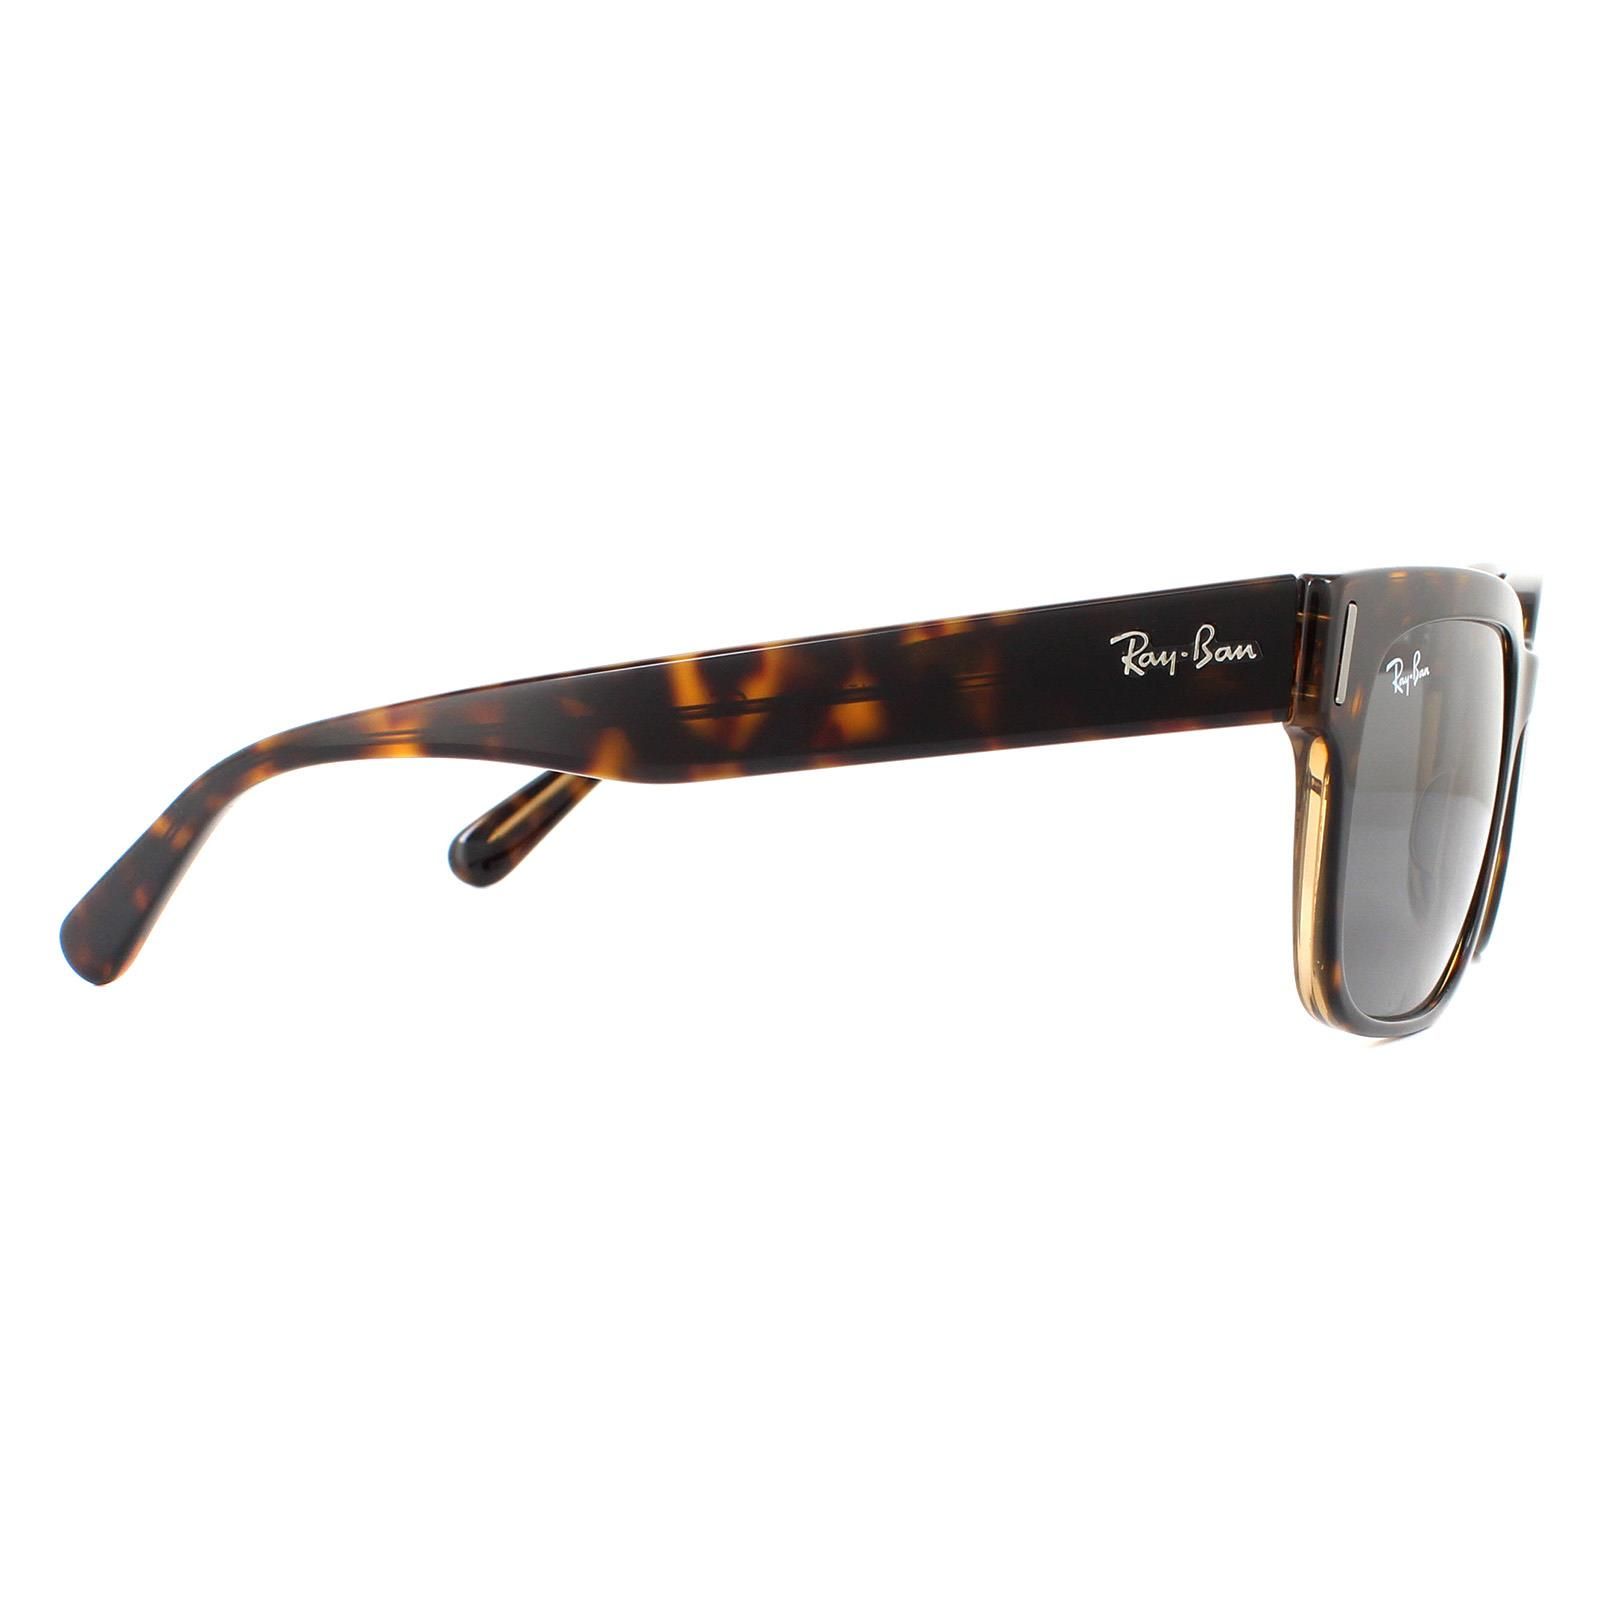 Ray-Ban Sunglasses Jeffrey RB2190 1292B1 Tortoise Dark Grey are a square shaped frame made from lightweight acetate. The Ray-Ban logo features on the corner of the lens in addition to the distinctive thick temples for authenticity